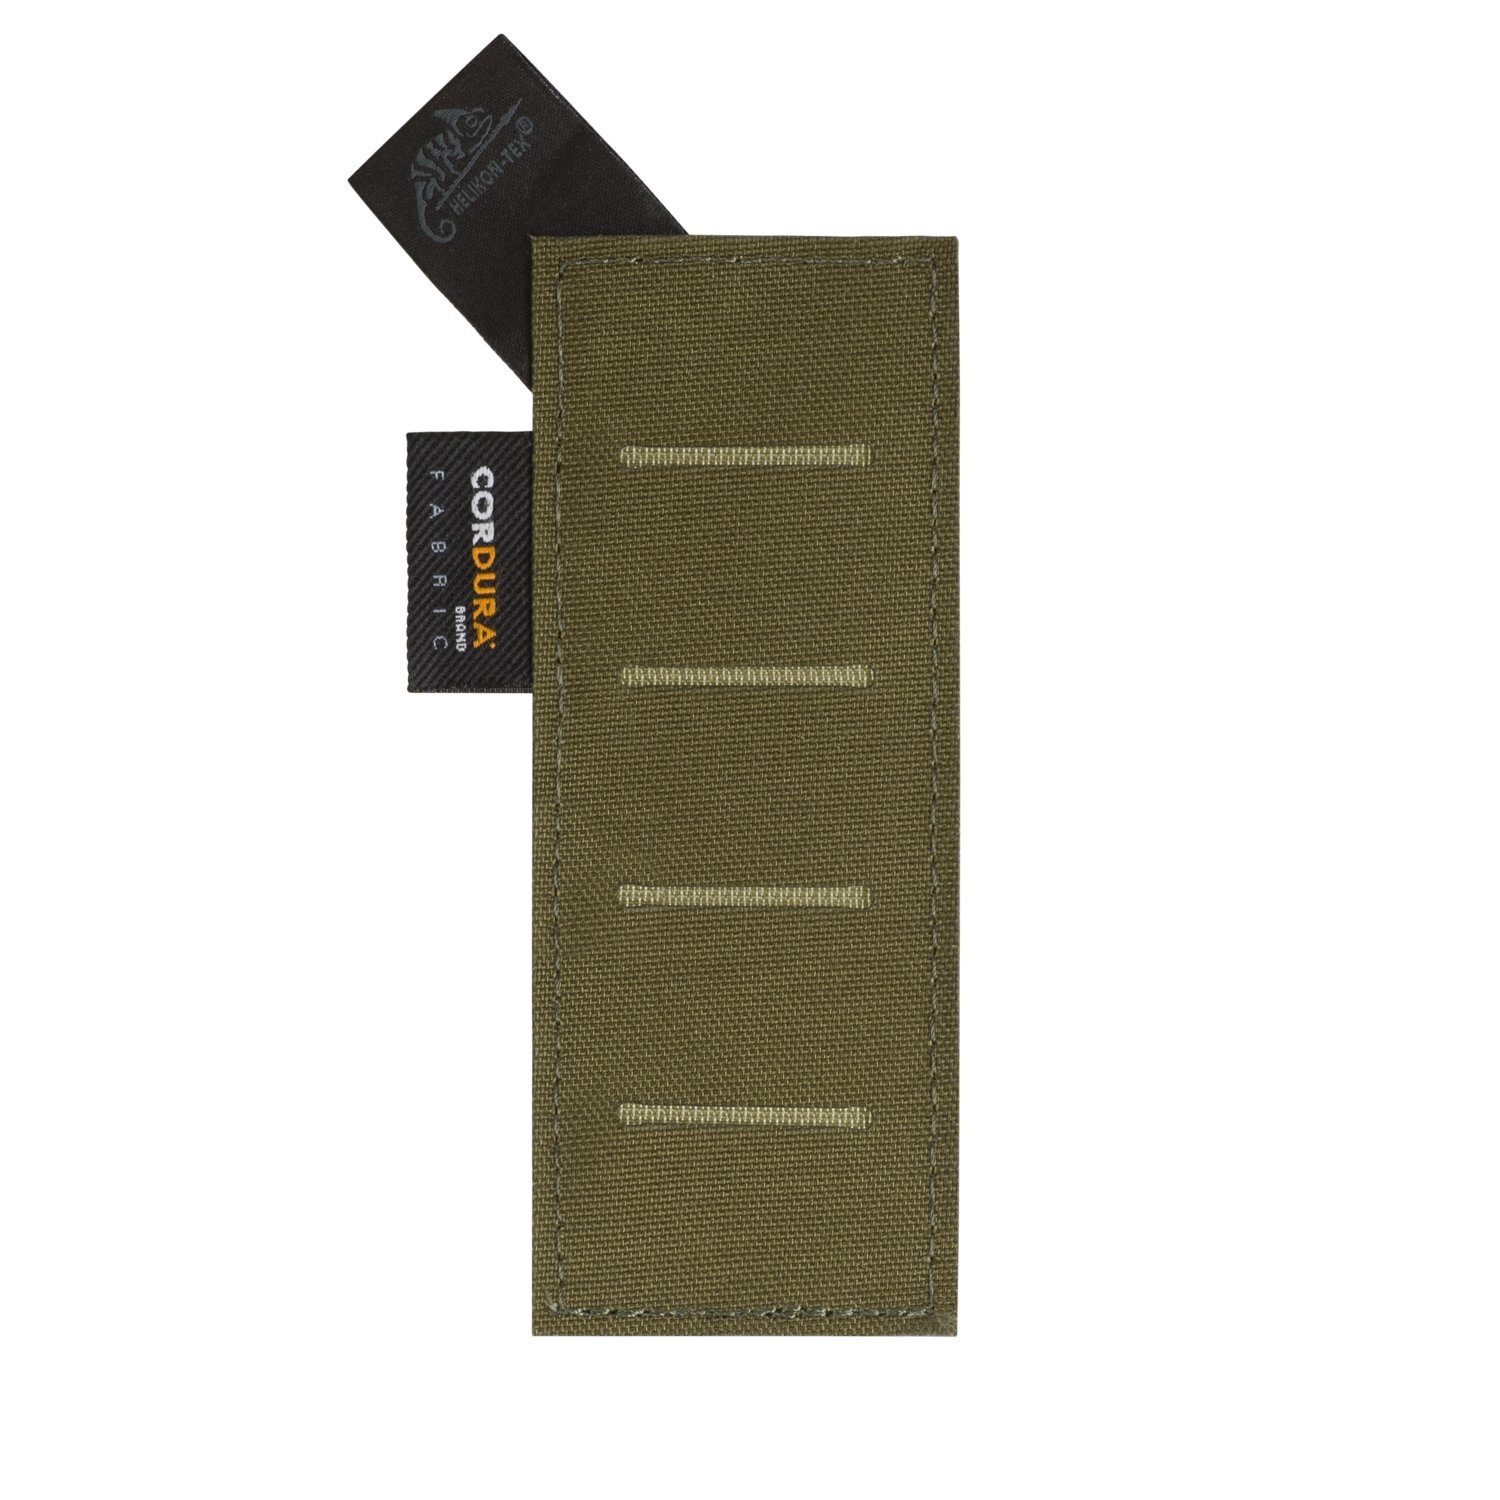 Image of Insert HELIKON MOLLE ADAPTER INSERT 1 - Cordura - Olive Green - One Size (IN-MA1-CD-02)